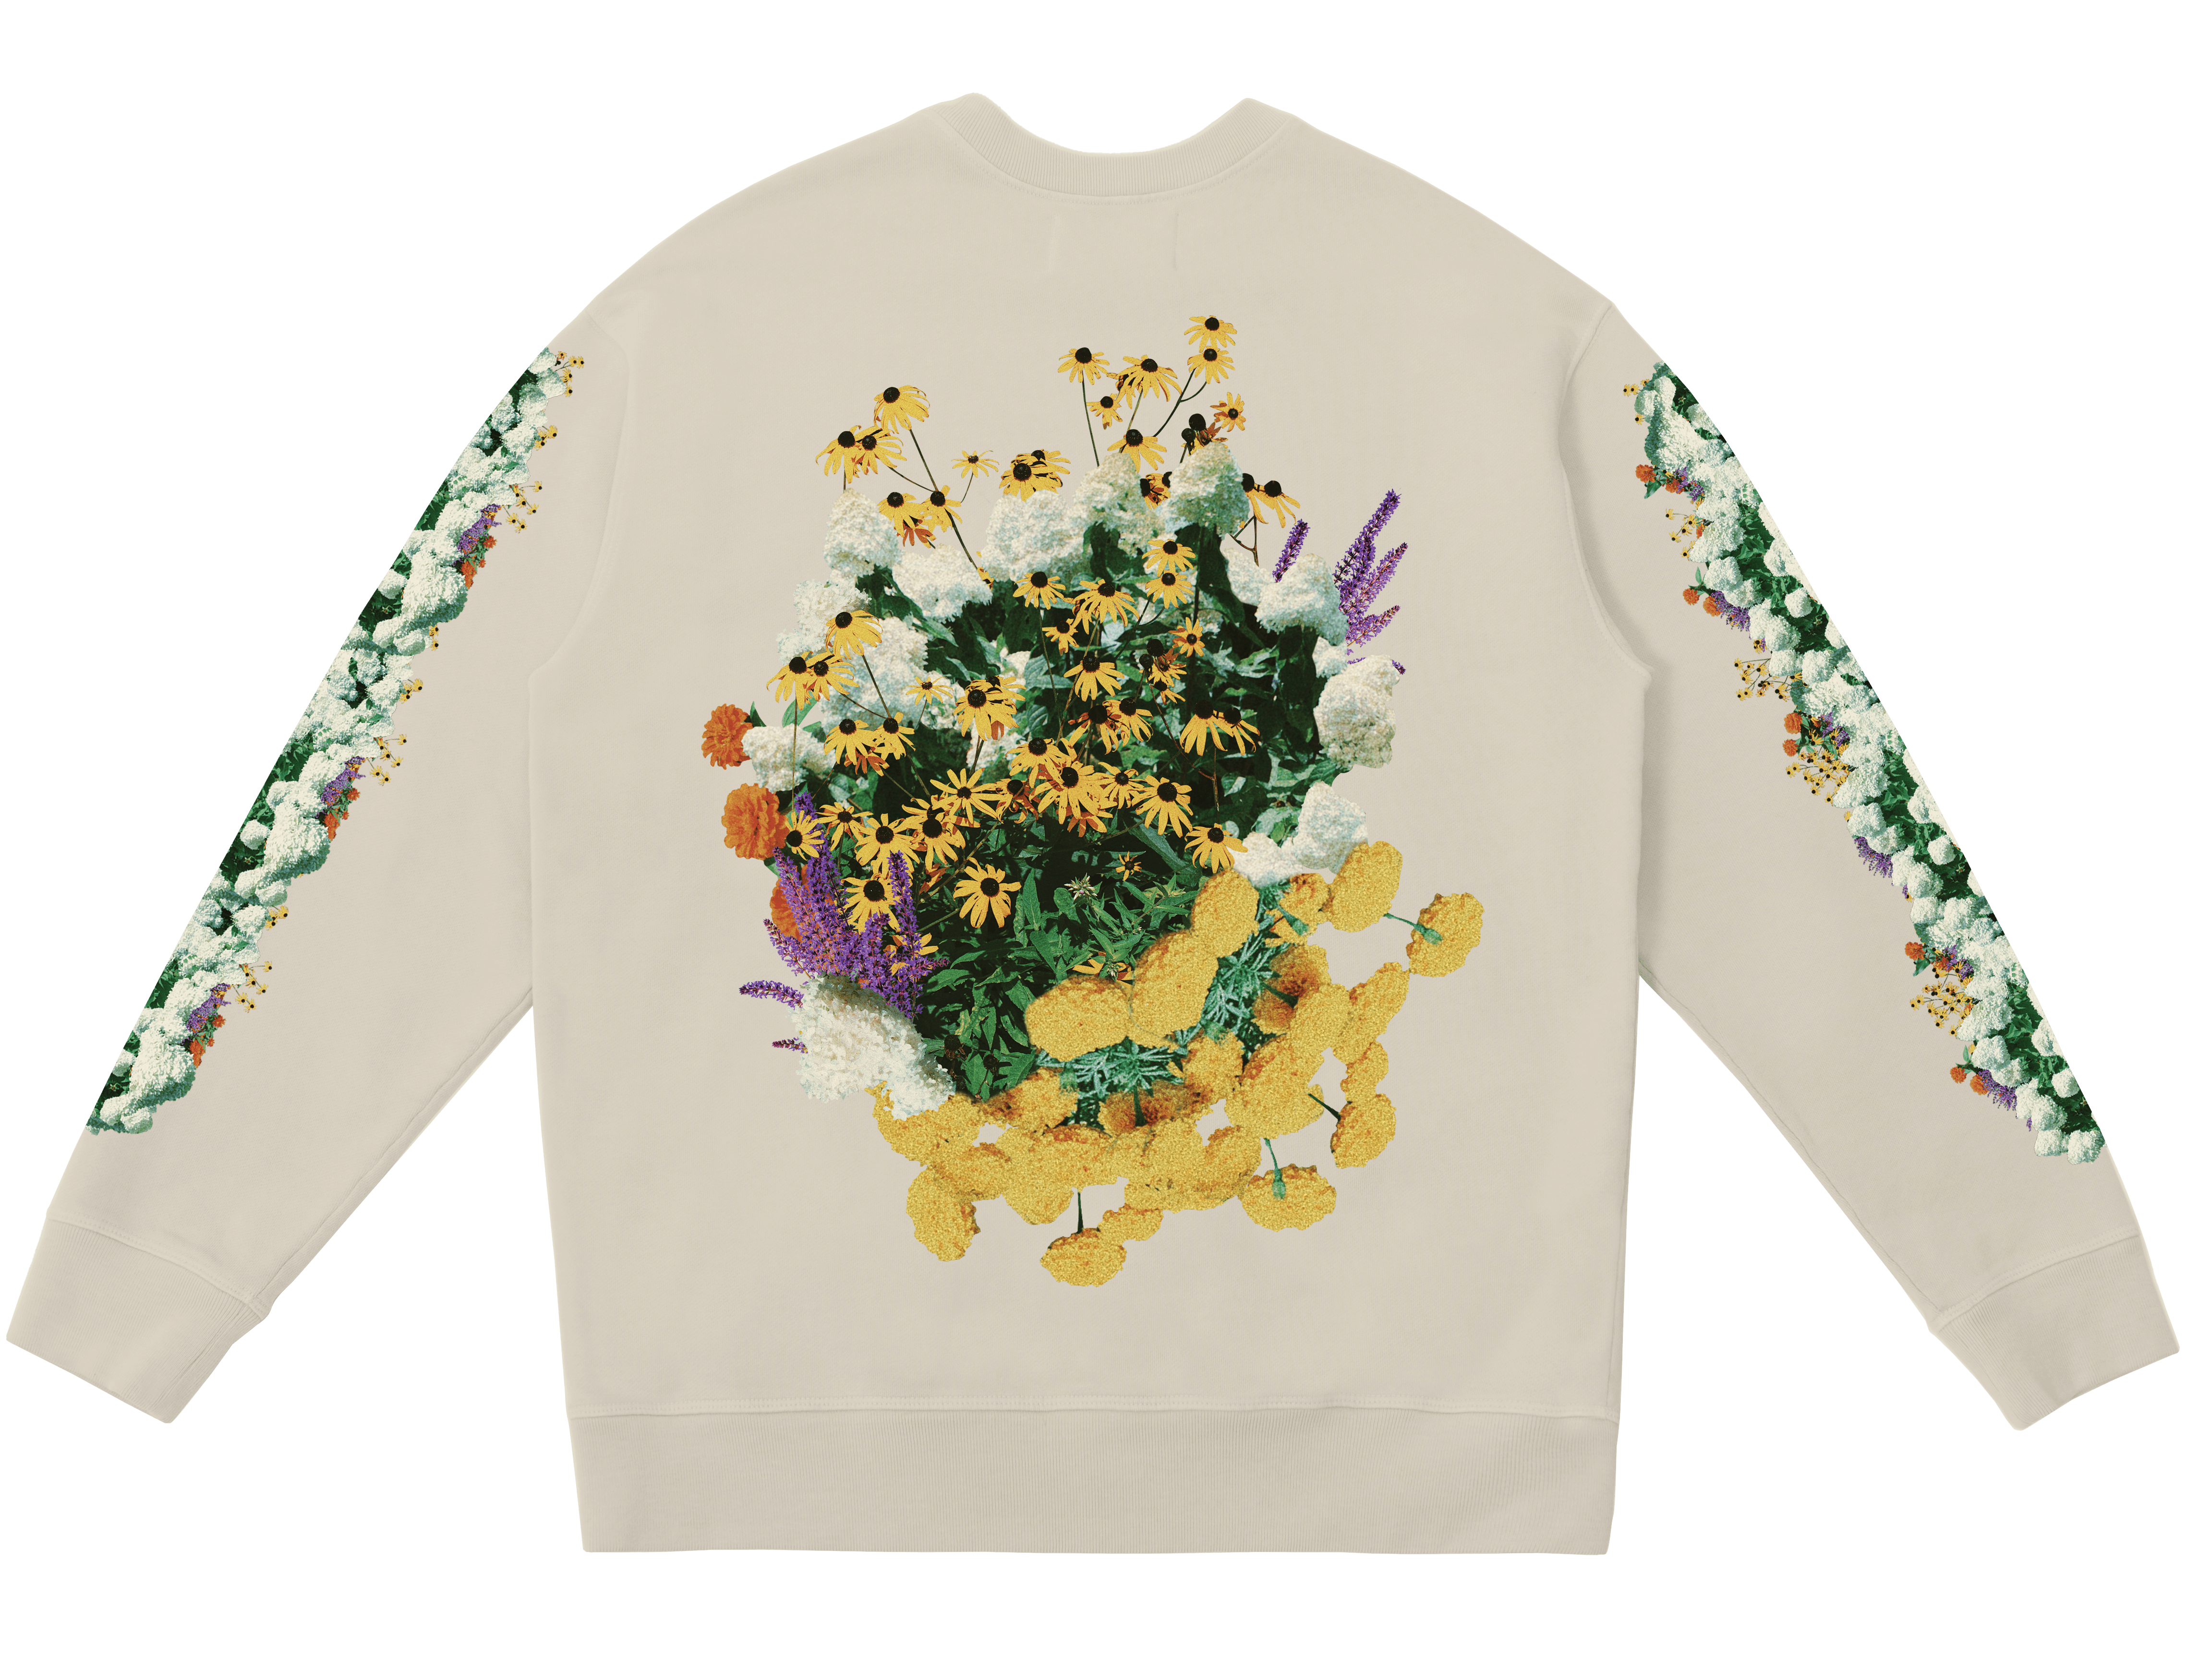 Back view of white crewneck